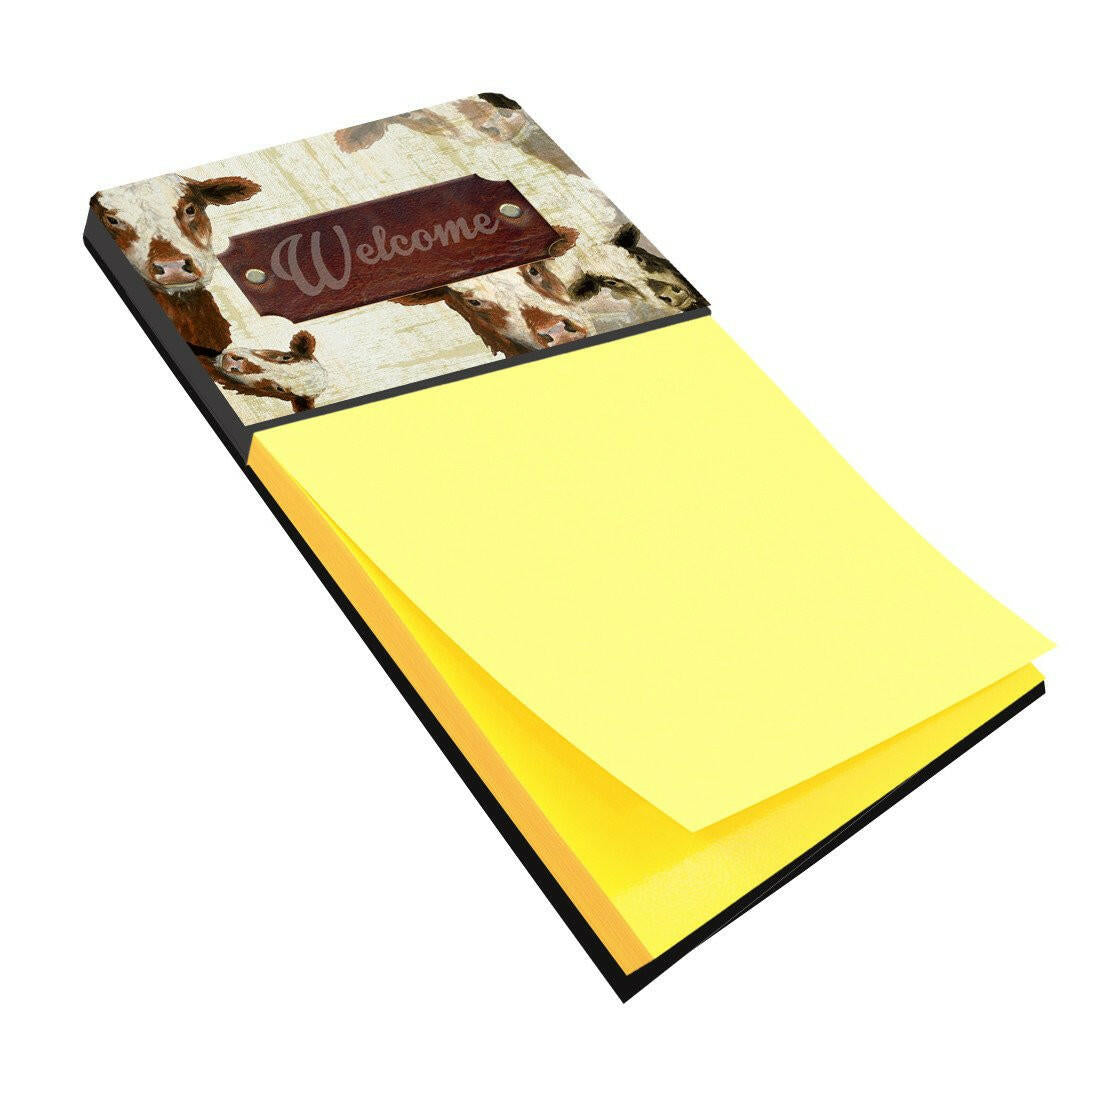 Welcome cow Refiillable Sticky Note Holder or Postit Note Dispenser SB3065SN by Caroline's Treasures